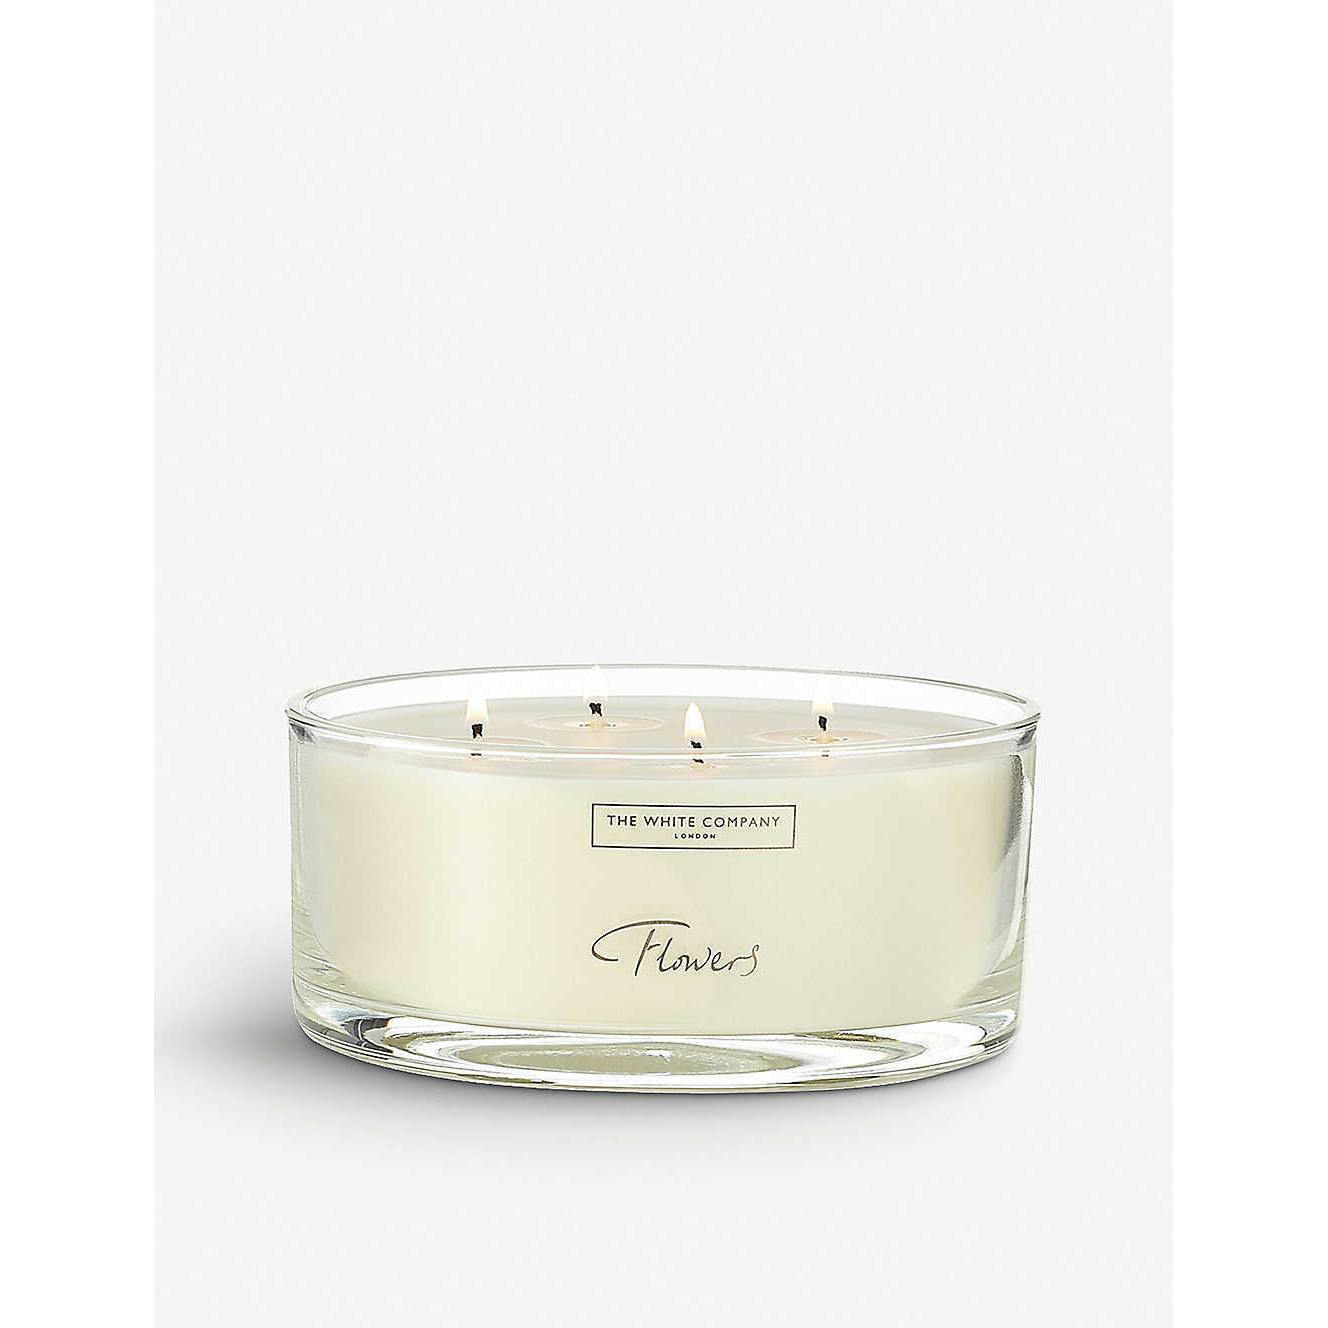 The White Company Flowers Large Candle - image 1